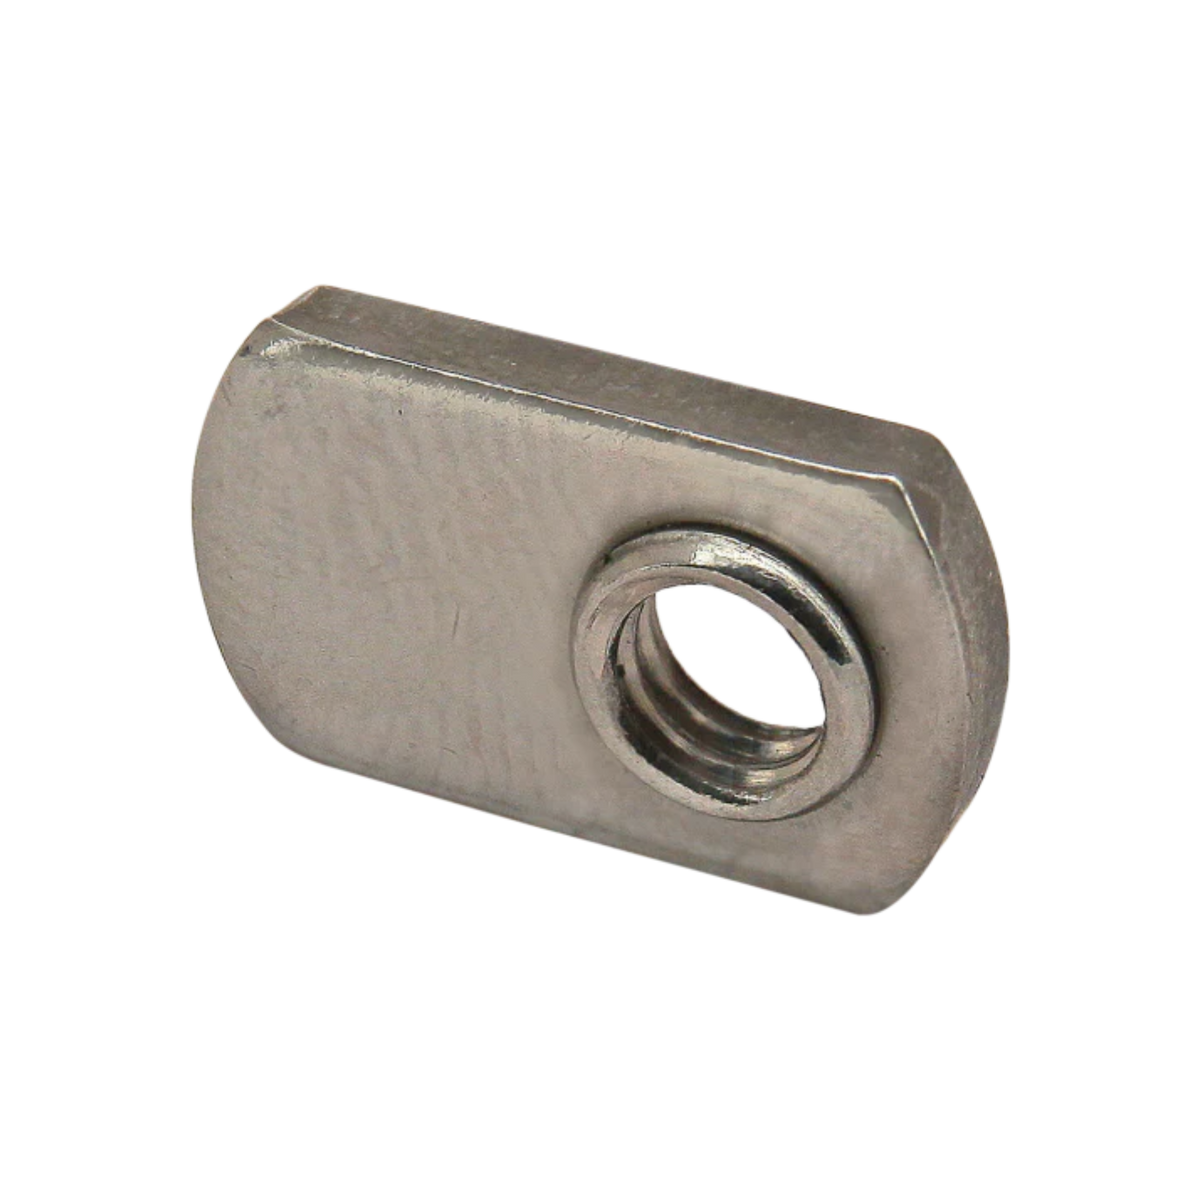 side view of a rectangular t-nut with rounded ends and a threaded hole on the right side